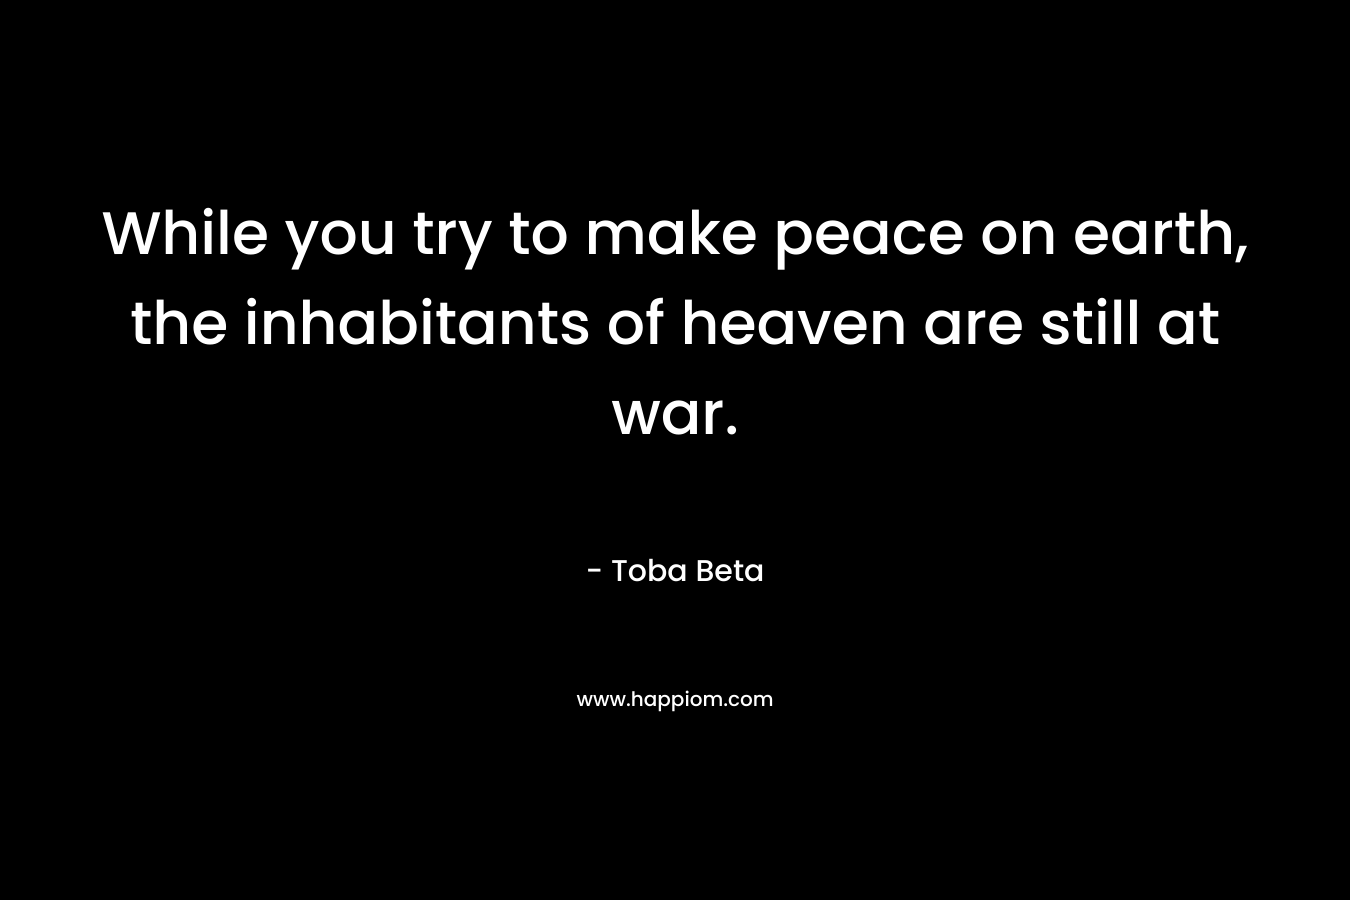 While you try to make peace on earth, the inhabitants of heaven are still at war. – Toba Beta